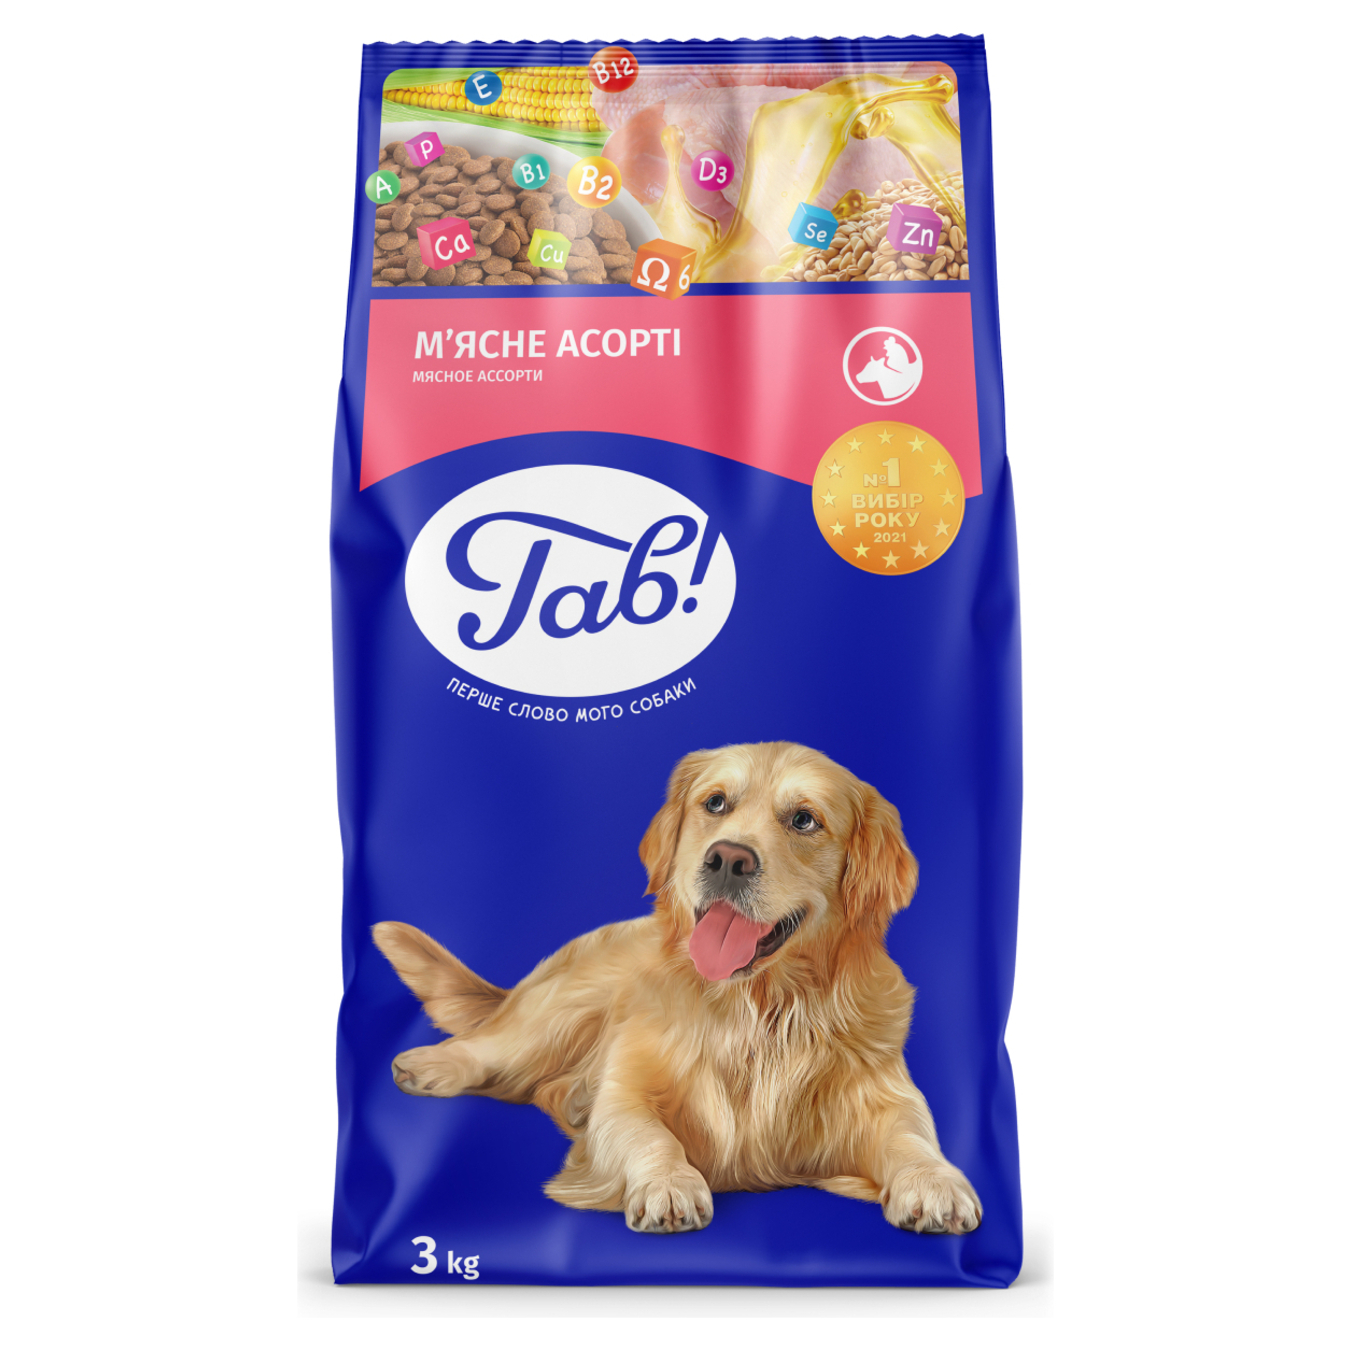 Gav! dry food for adult dogs is full-rational with assorted meat 3 kg